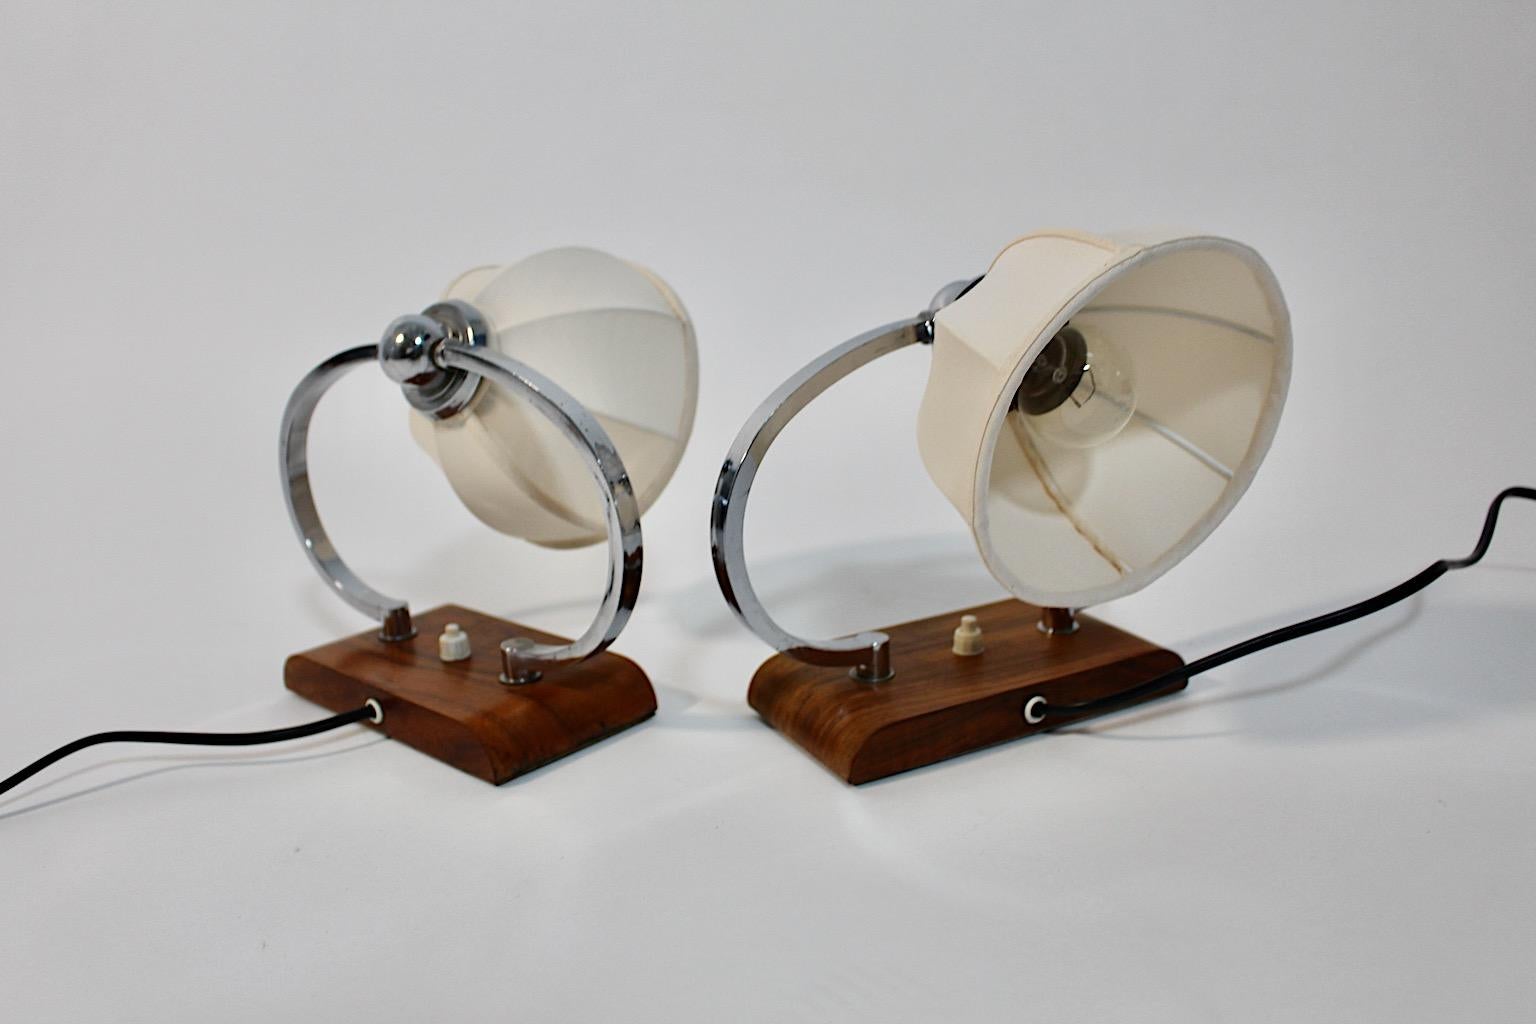 Art Deco vintage pair of bedside lamps or table lamps from walnut and chromed metal circa 1925 Austria.
A stunning pair of bedside lamps or table lamps with curved mounting from chromed metal and rectangular base from walnut each with one E 27